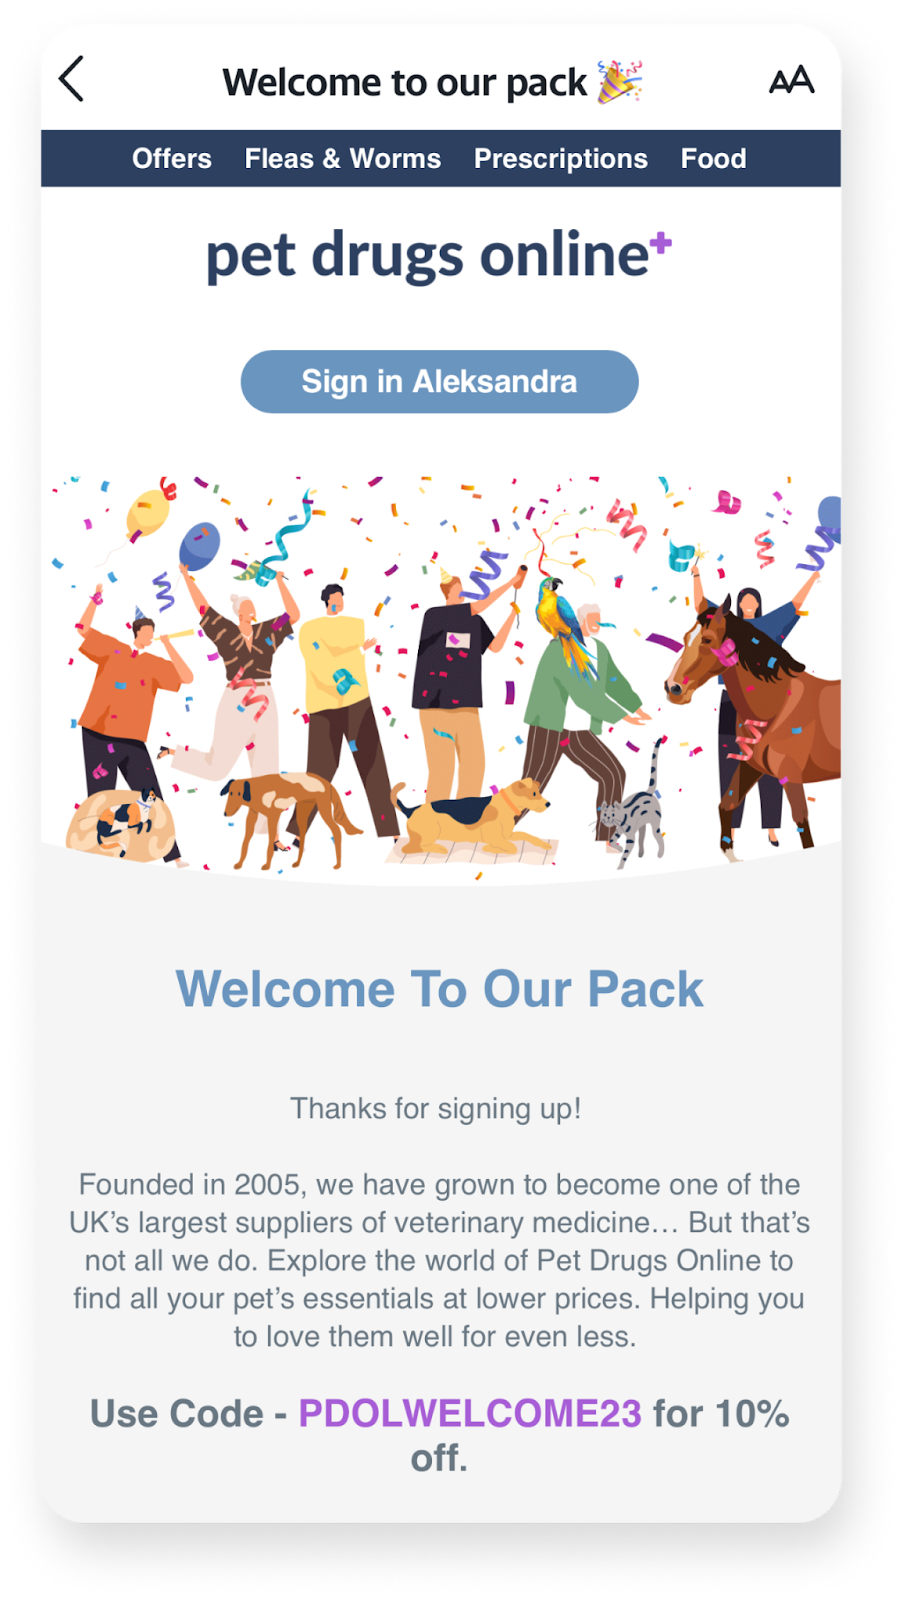 pet drugs online welcome email